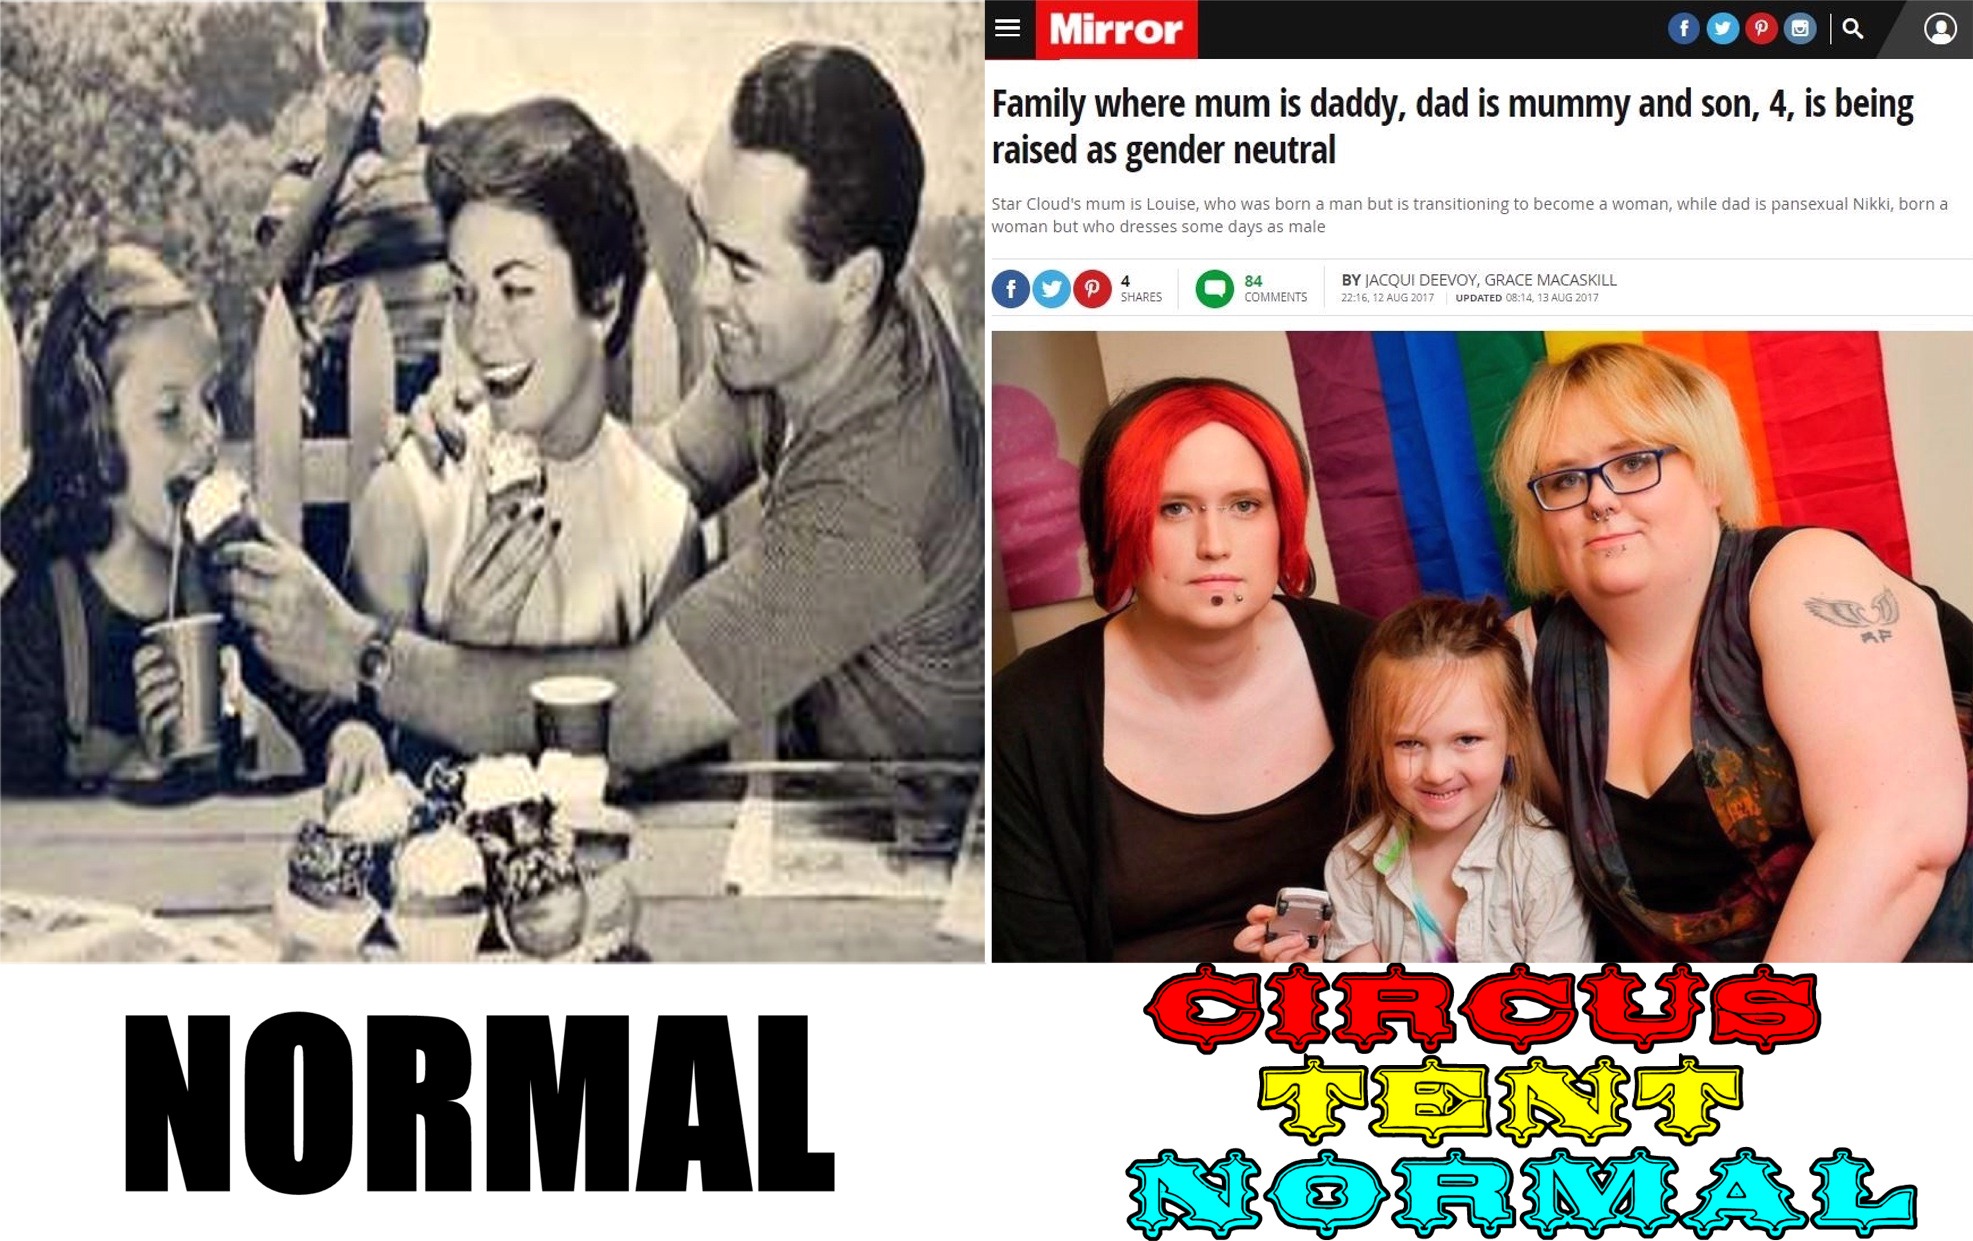 memes - television program - Mirror Family where mum is daddy, dad is mummy and son, 4, is being raised as gender neutral 000. Maced Bout Normal